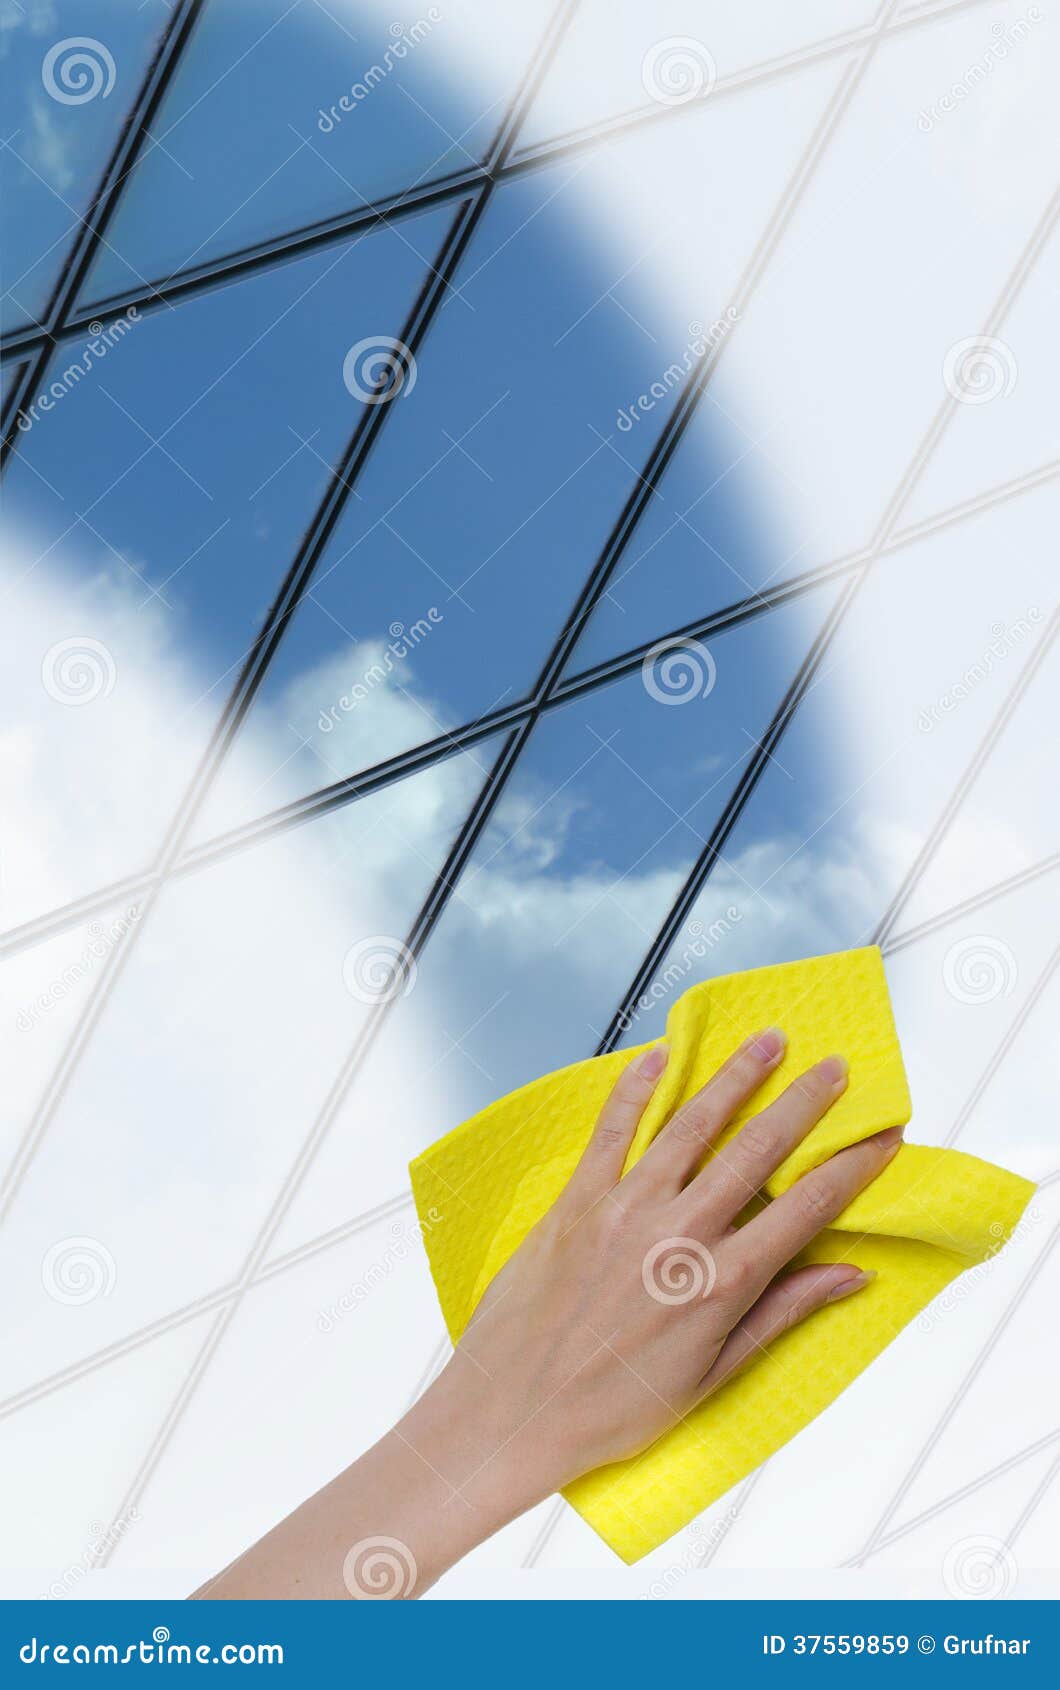 Hand Cleaning A Glass Surface Of A Building Stock Image ...